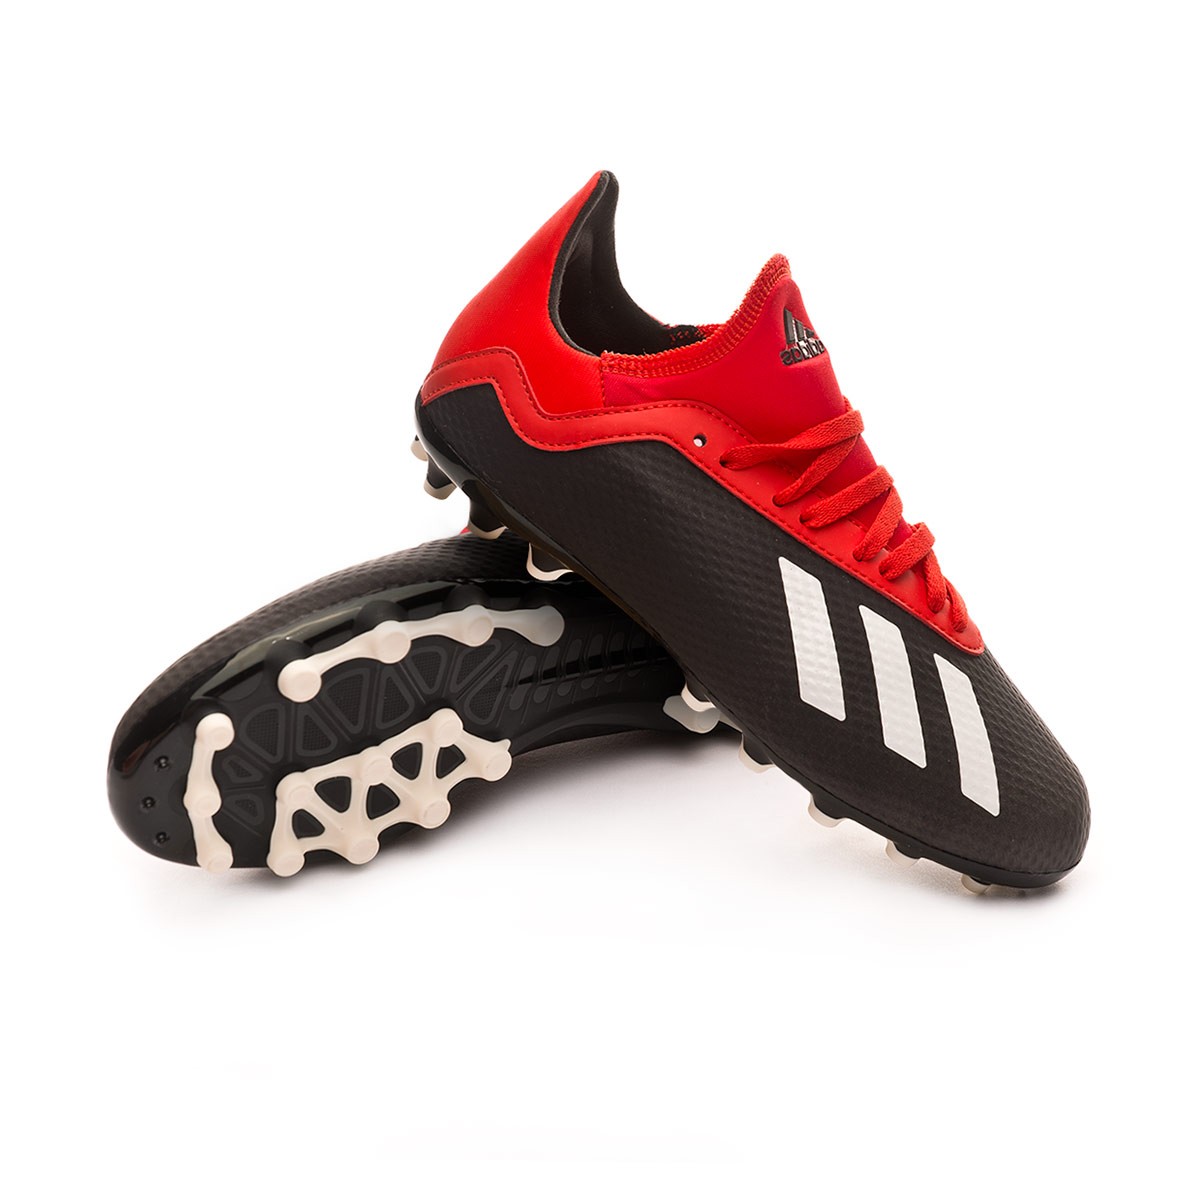 adidas x 18.3 black and red